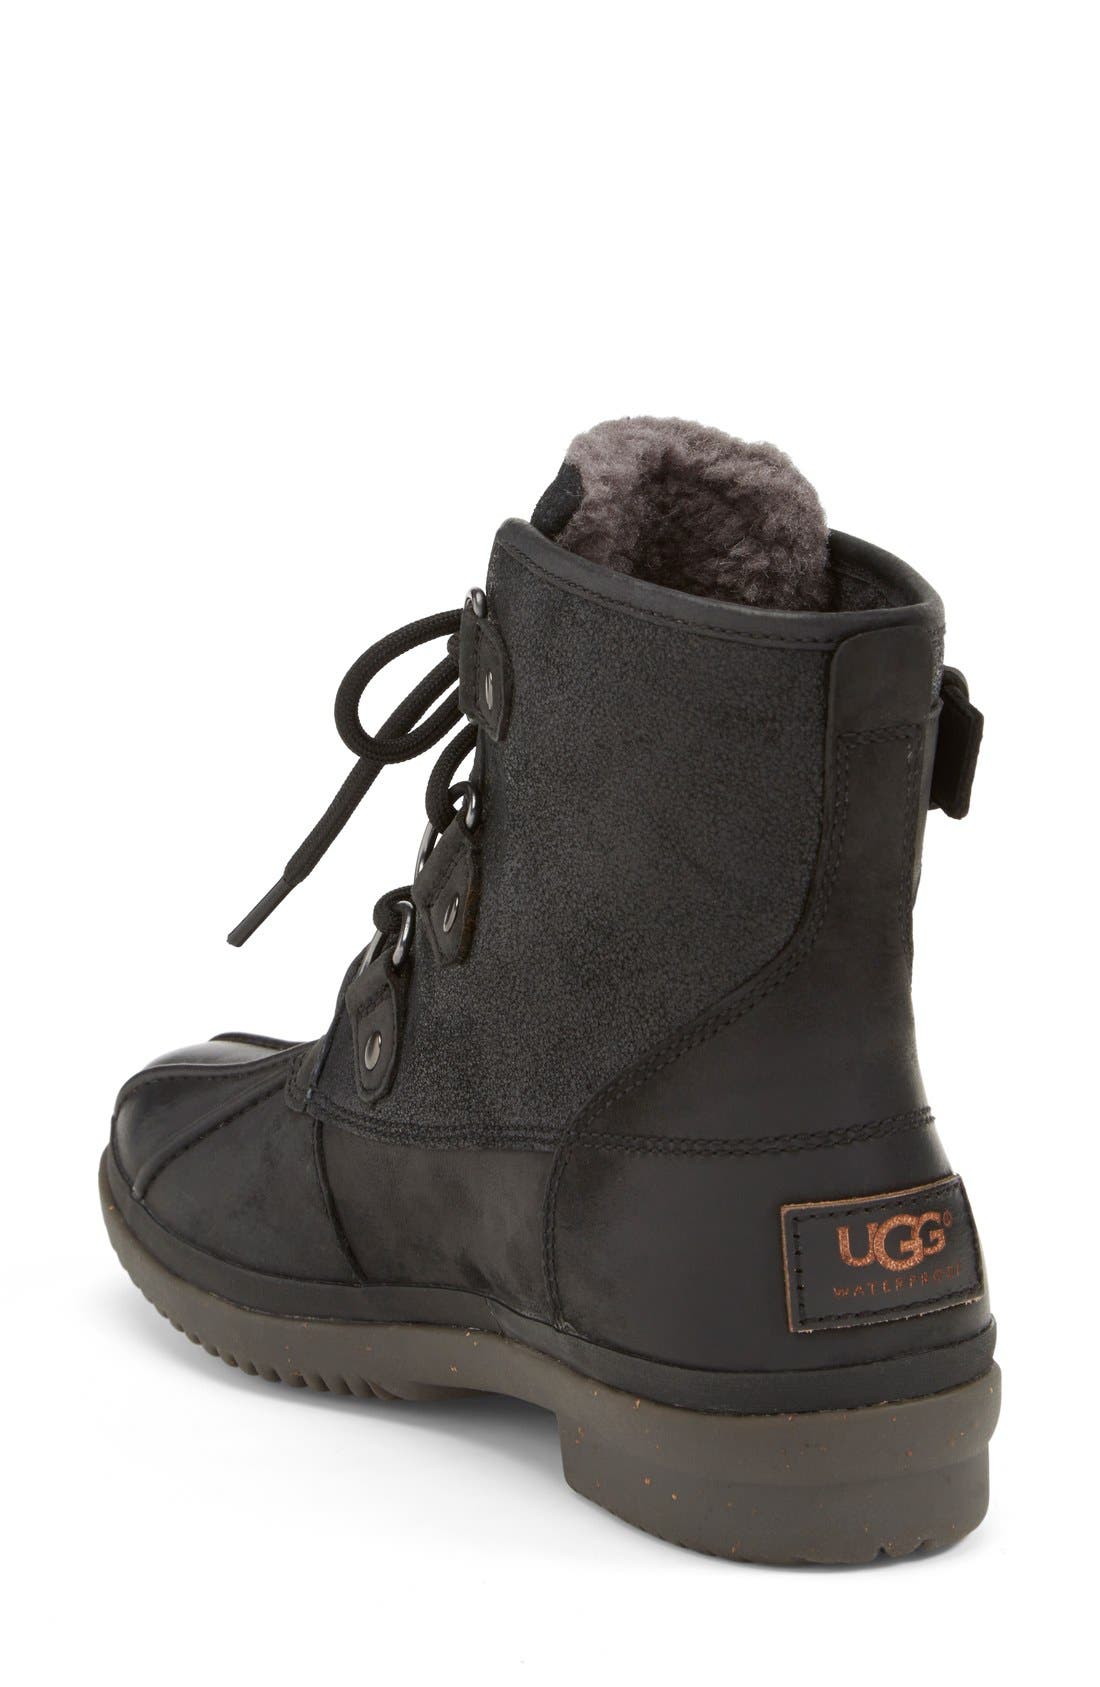 ugg cecile winter boot